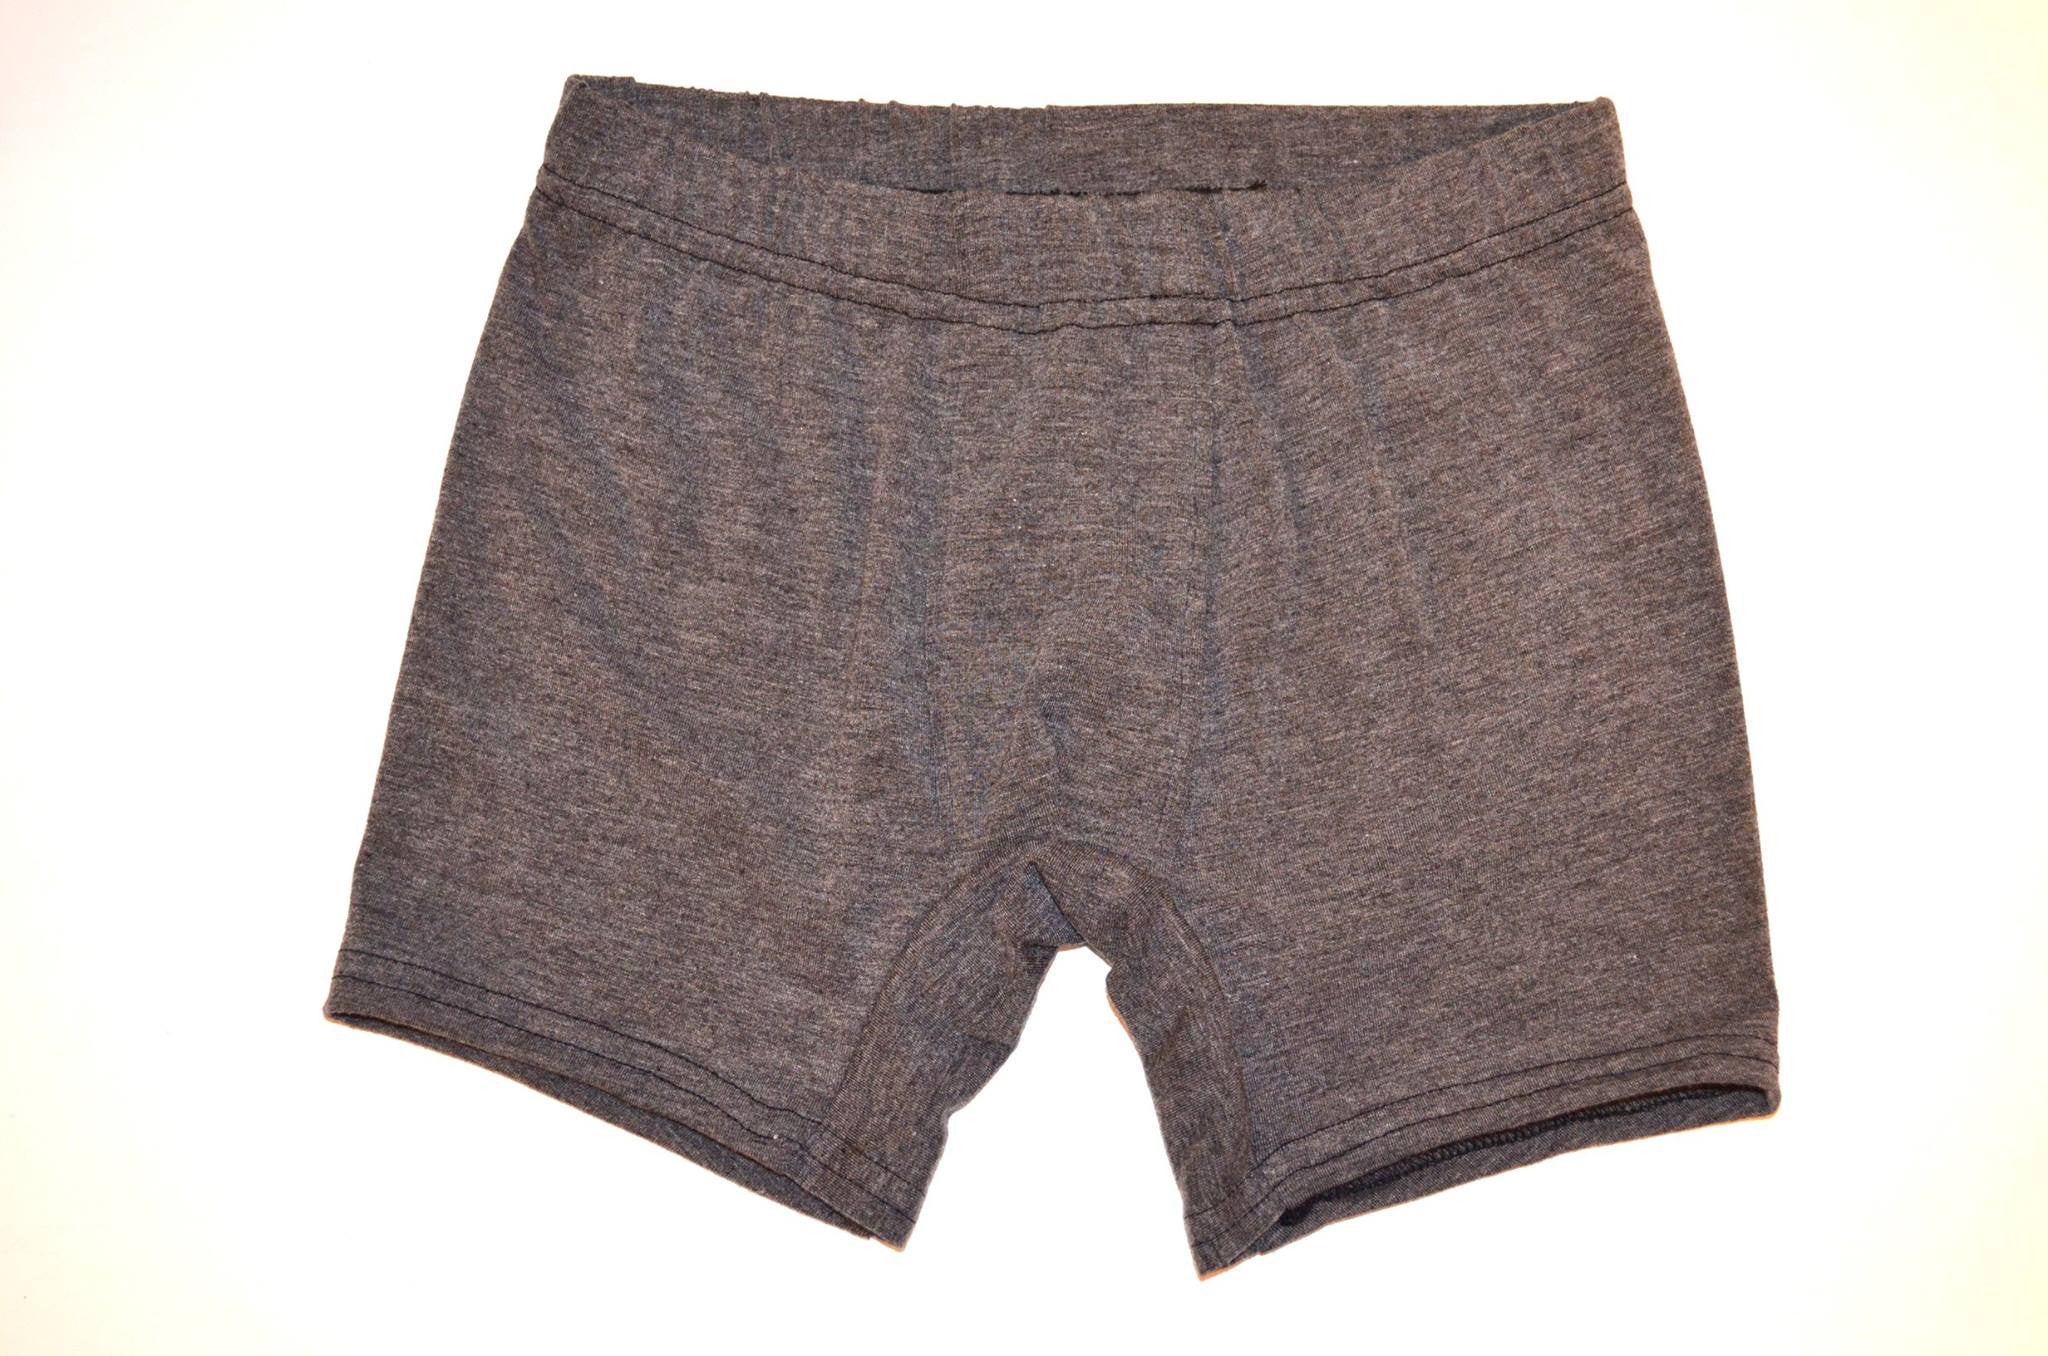 Boy&#39;s Walbrook Boxer Briefs PDF Sewing Pattern 2T to 14 years